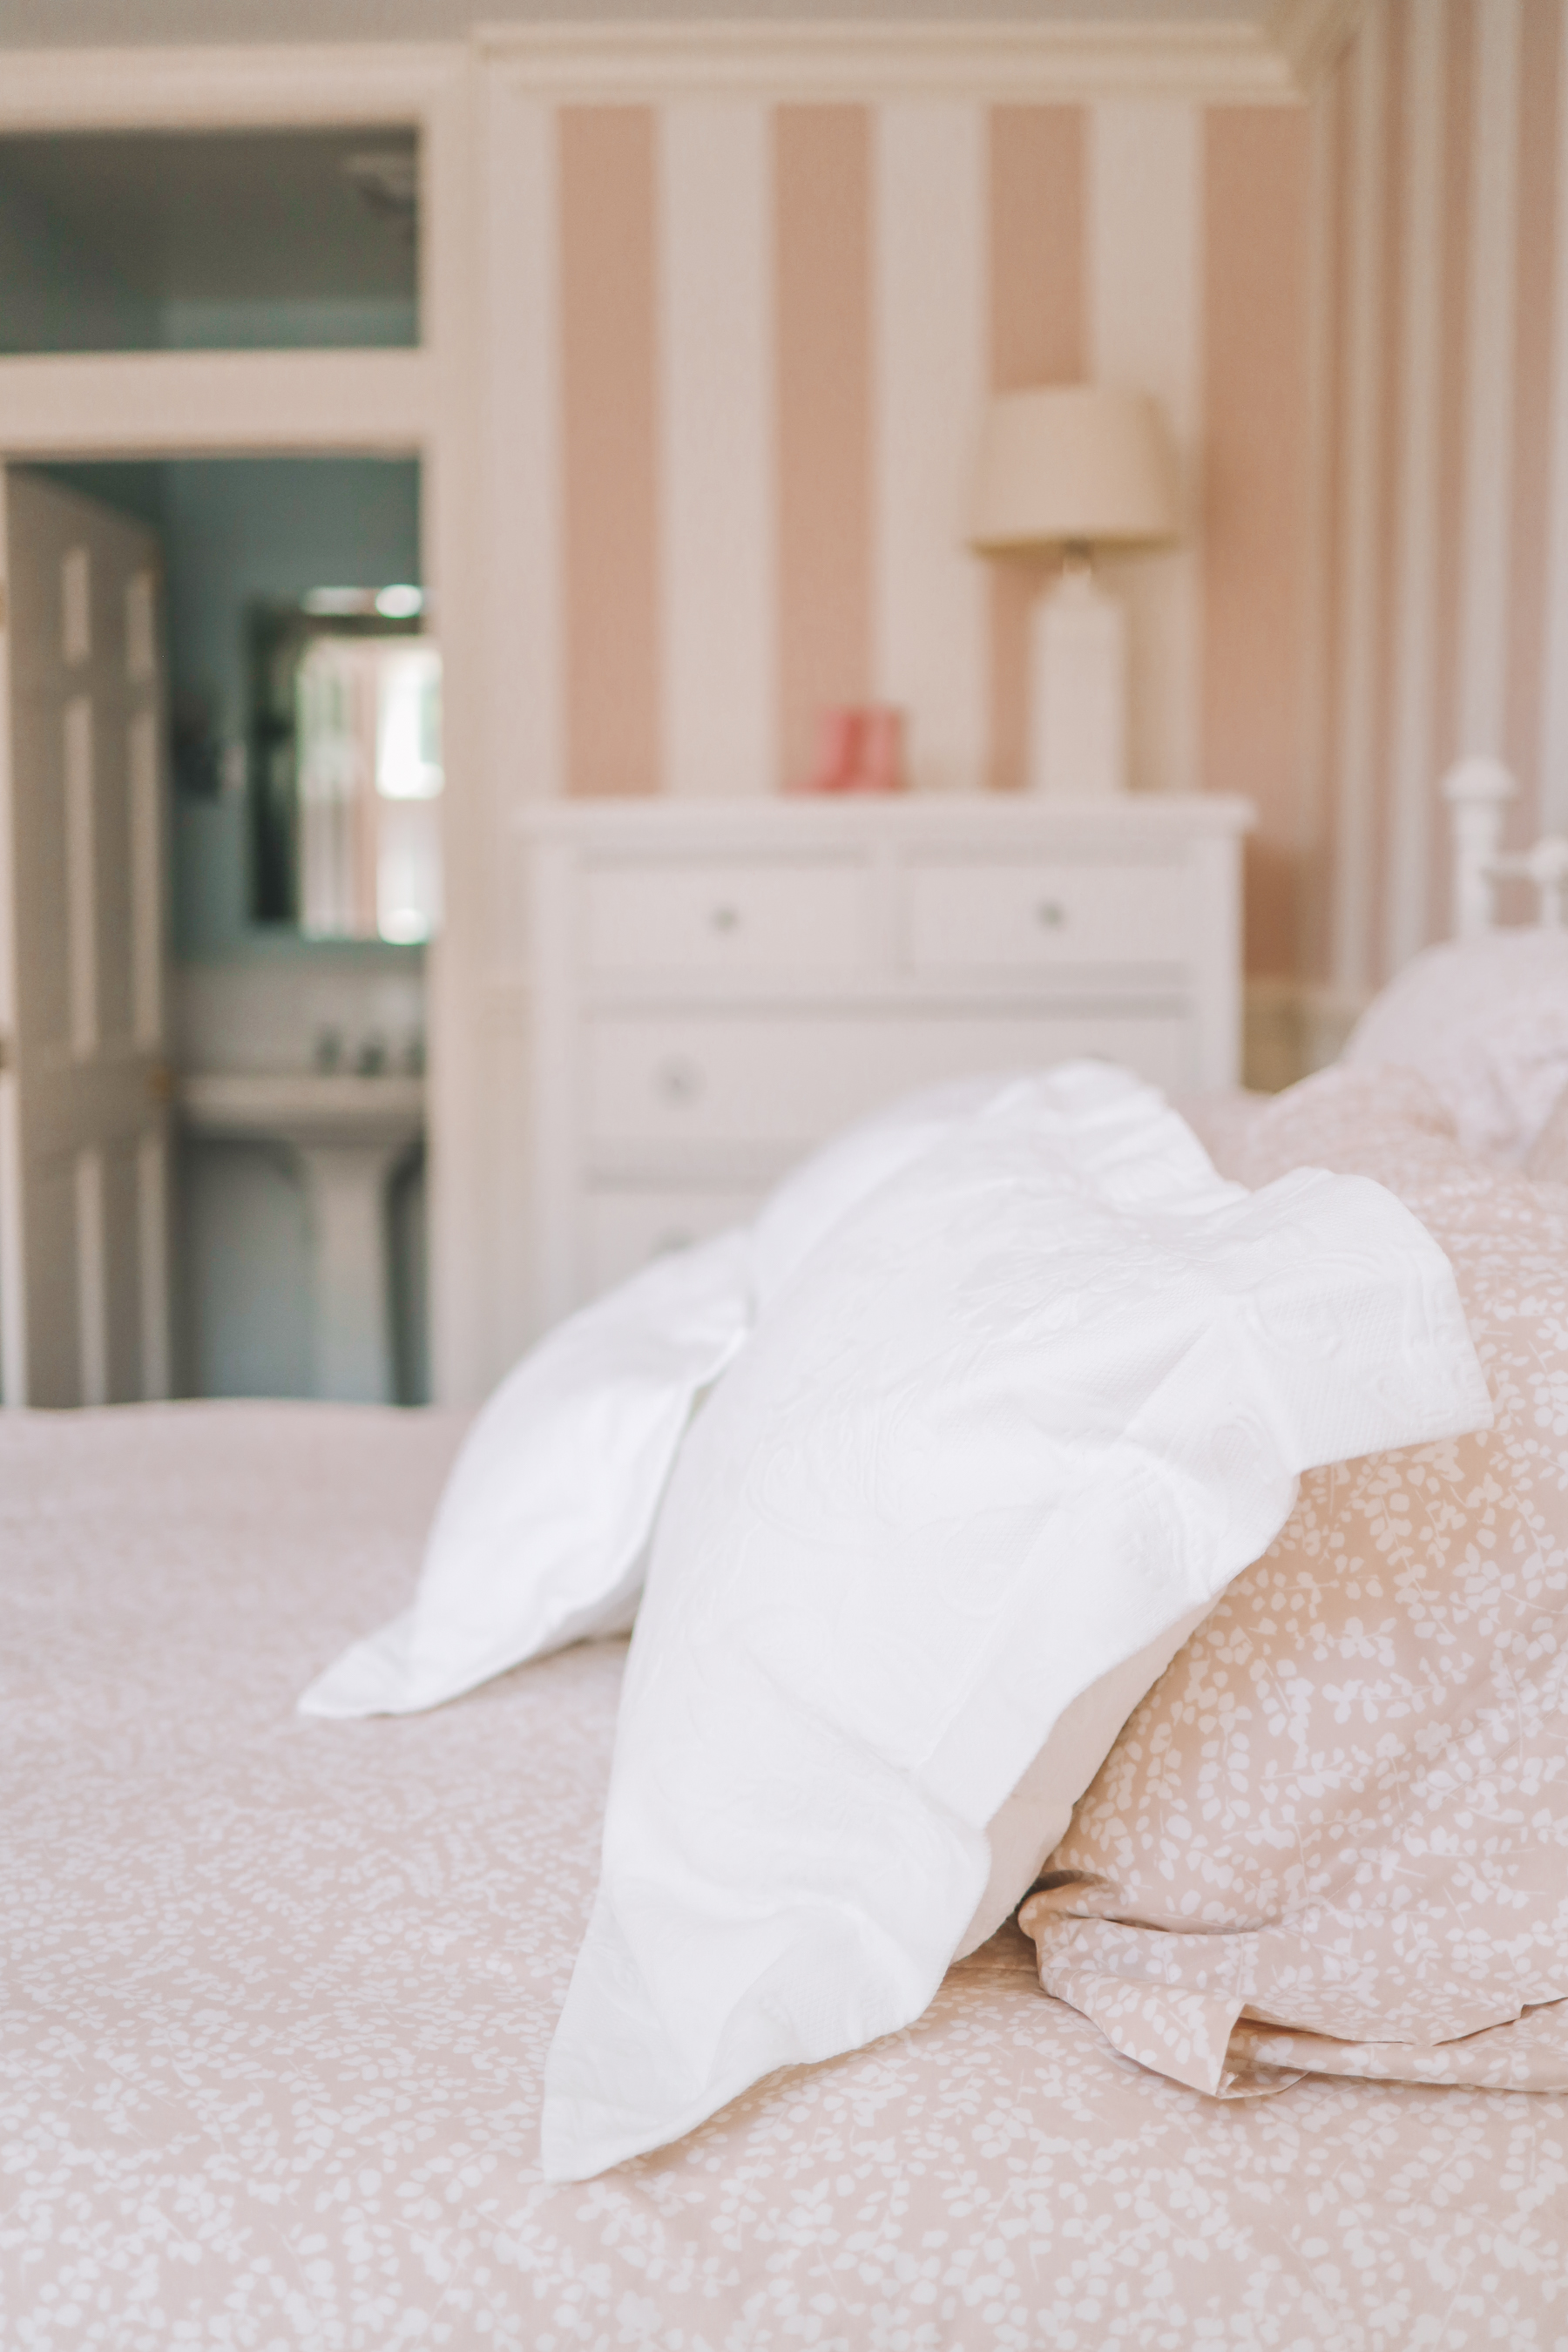 A sideview of bedding, white pillows on pink sheets